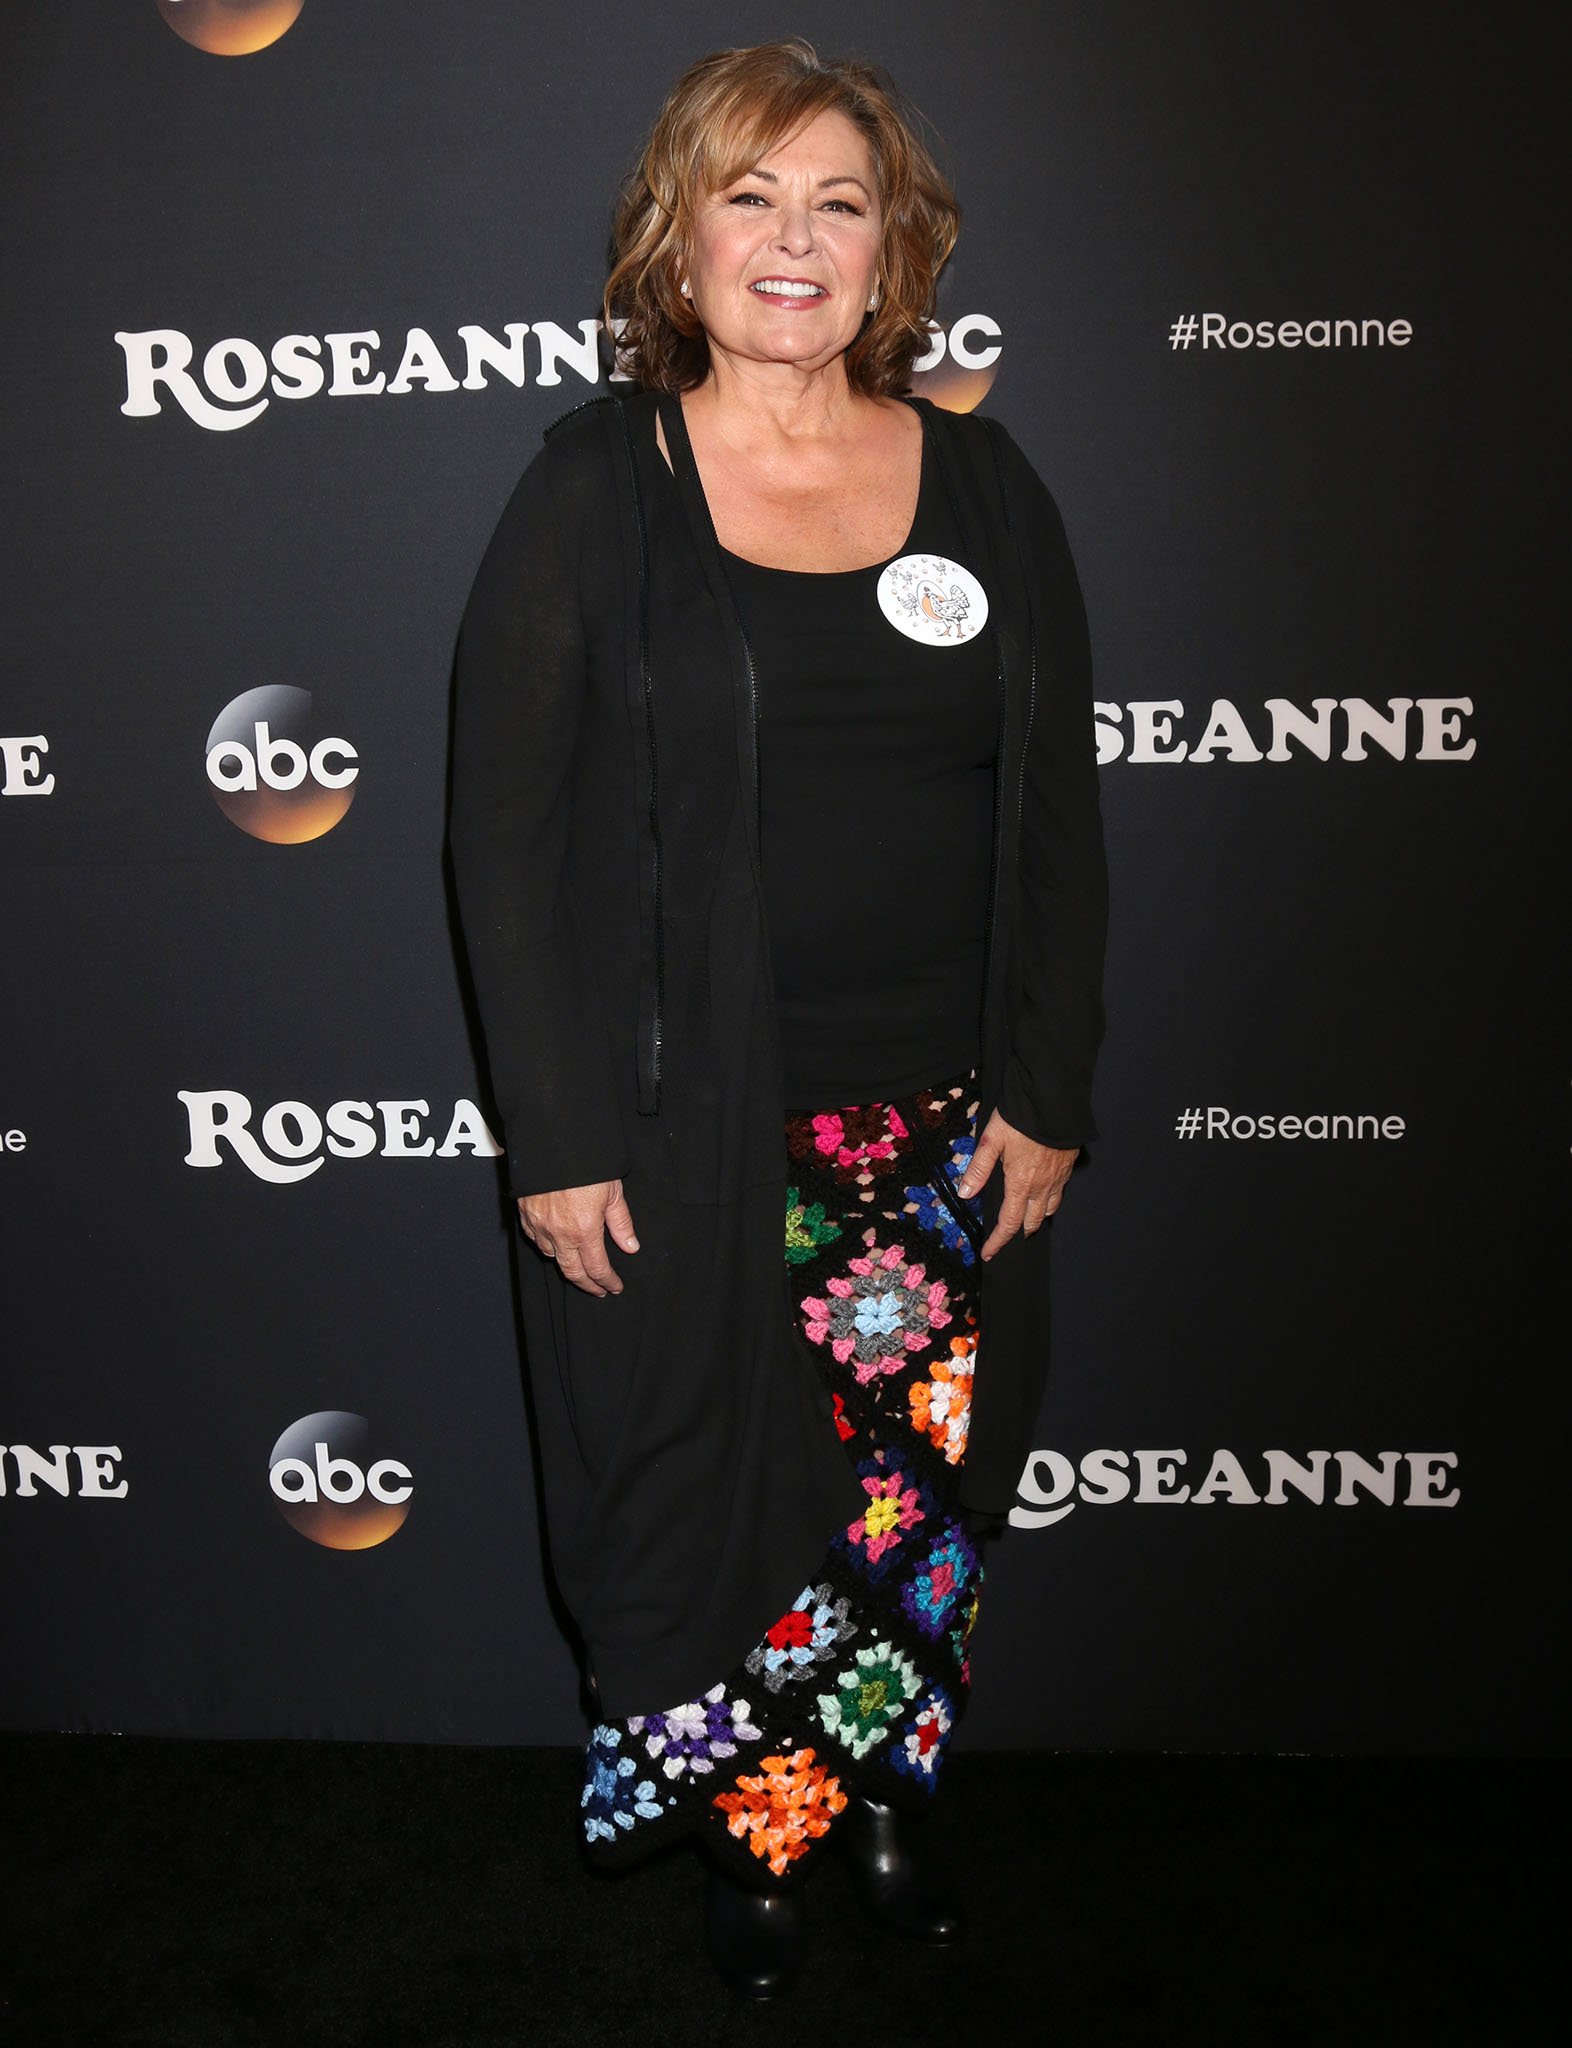 Roseanne Barr, recognized for her self-titled sitcom, has earned critical acclaim, including an Emmy and a Golden Globe Award for Best Actress, and her successful career has resulted in an estimated net worth of approximately $80 million